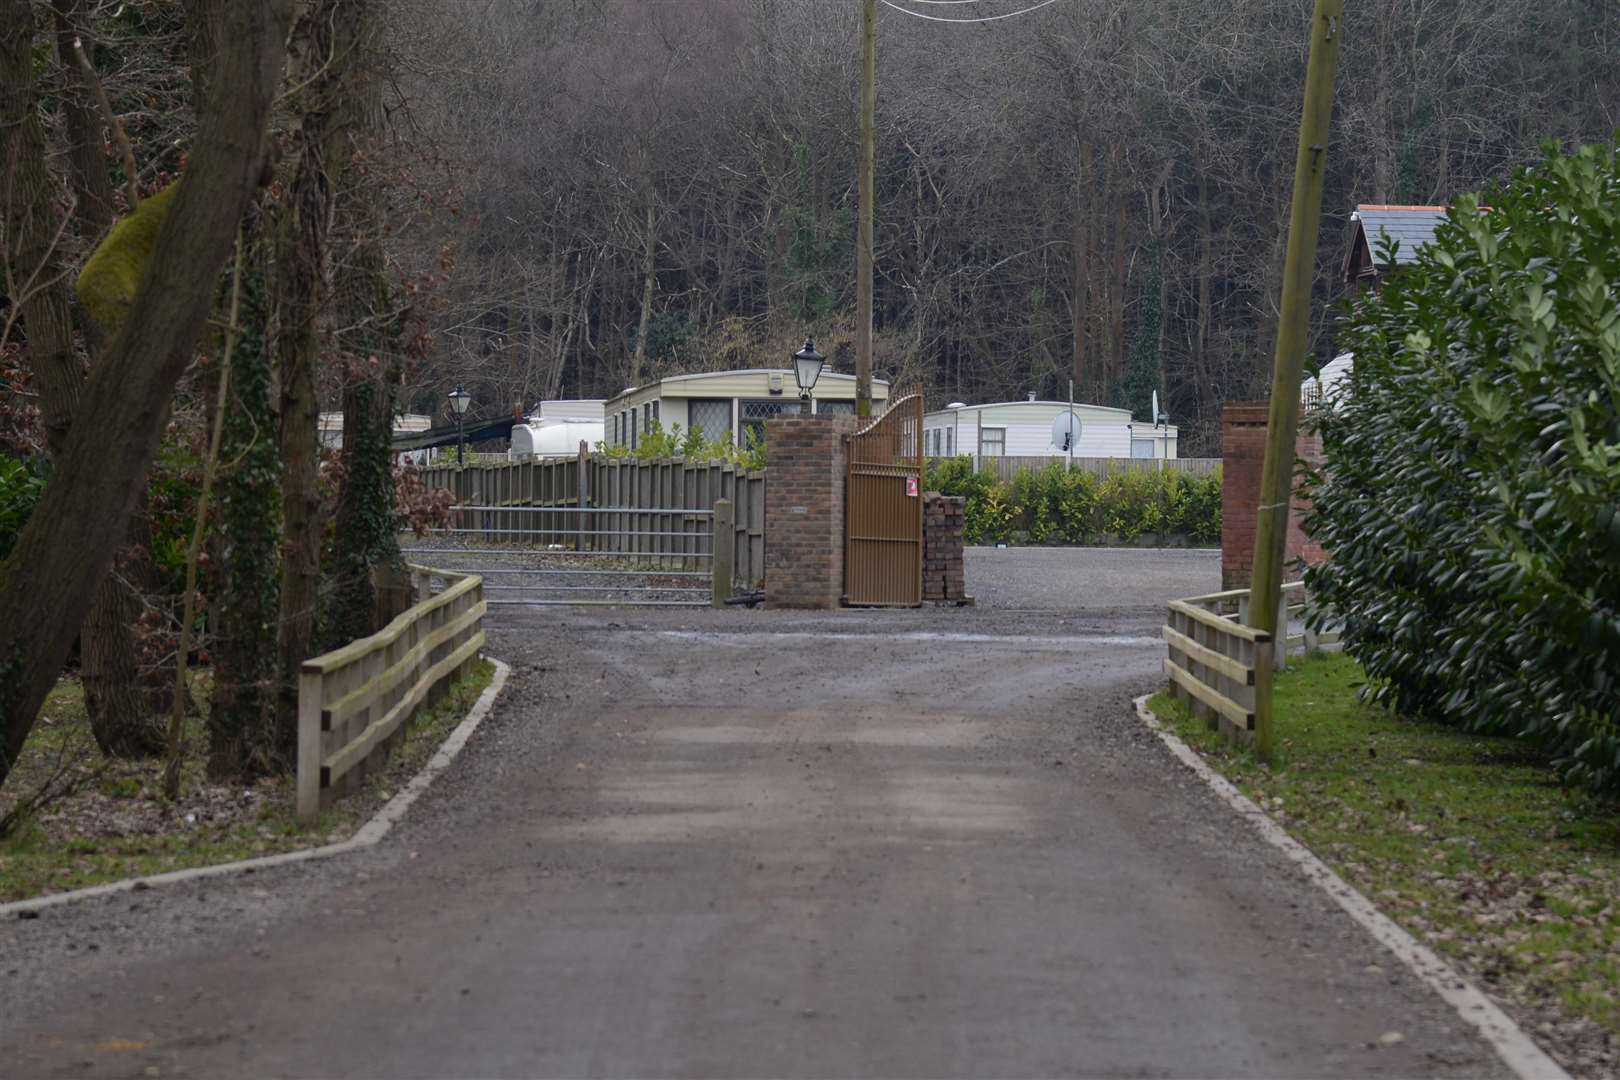 The Brotherhood Wood traveller site at Dunkirk. Picture: Chris Davey